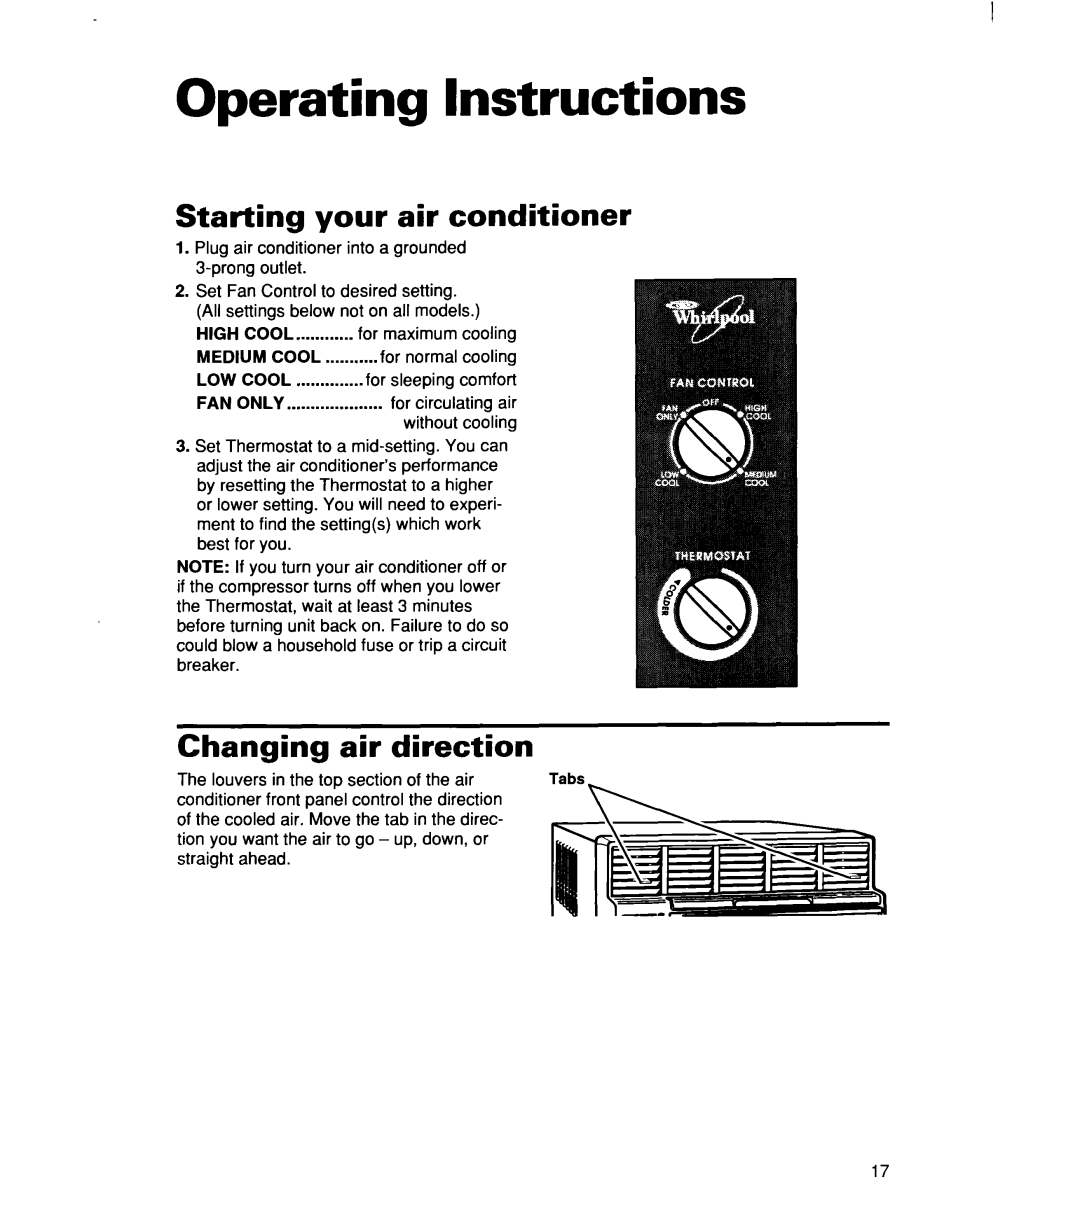 Whirlpool ACM184XE0, ACM 152XE0, ACM244XE0 Operating Instructions, Starting your air conditioner, Changing air direction 